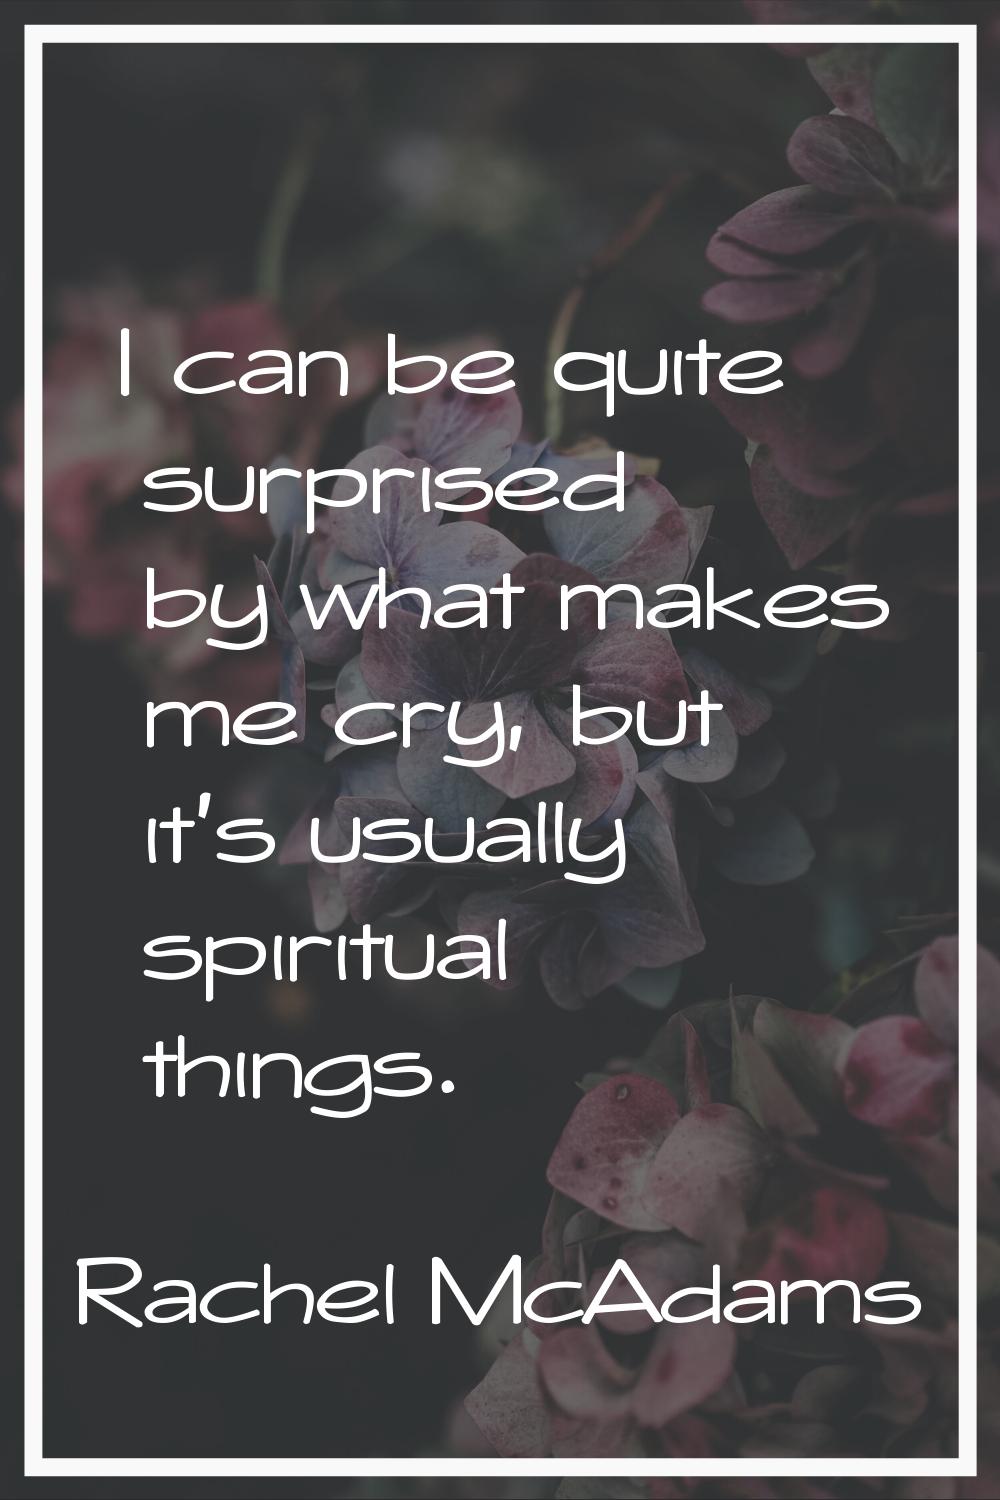 I can be quite surprised by what makes me cry, but it's usually spiritual things.